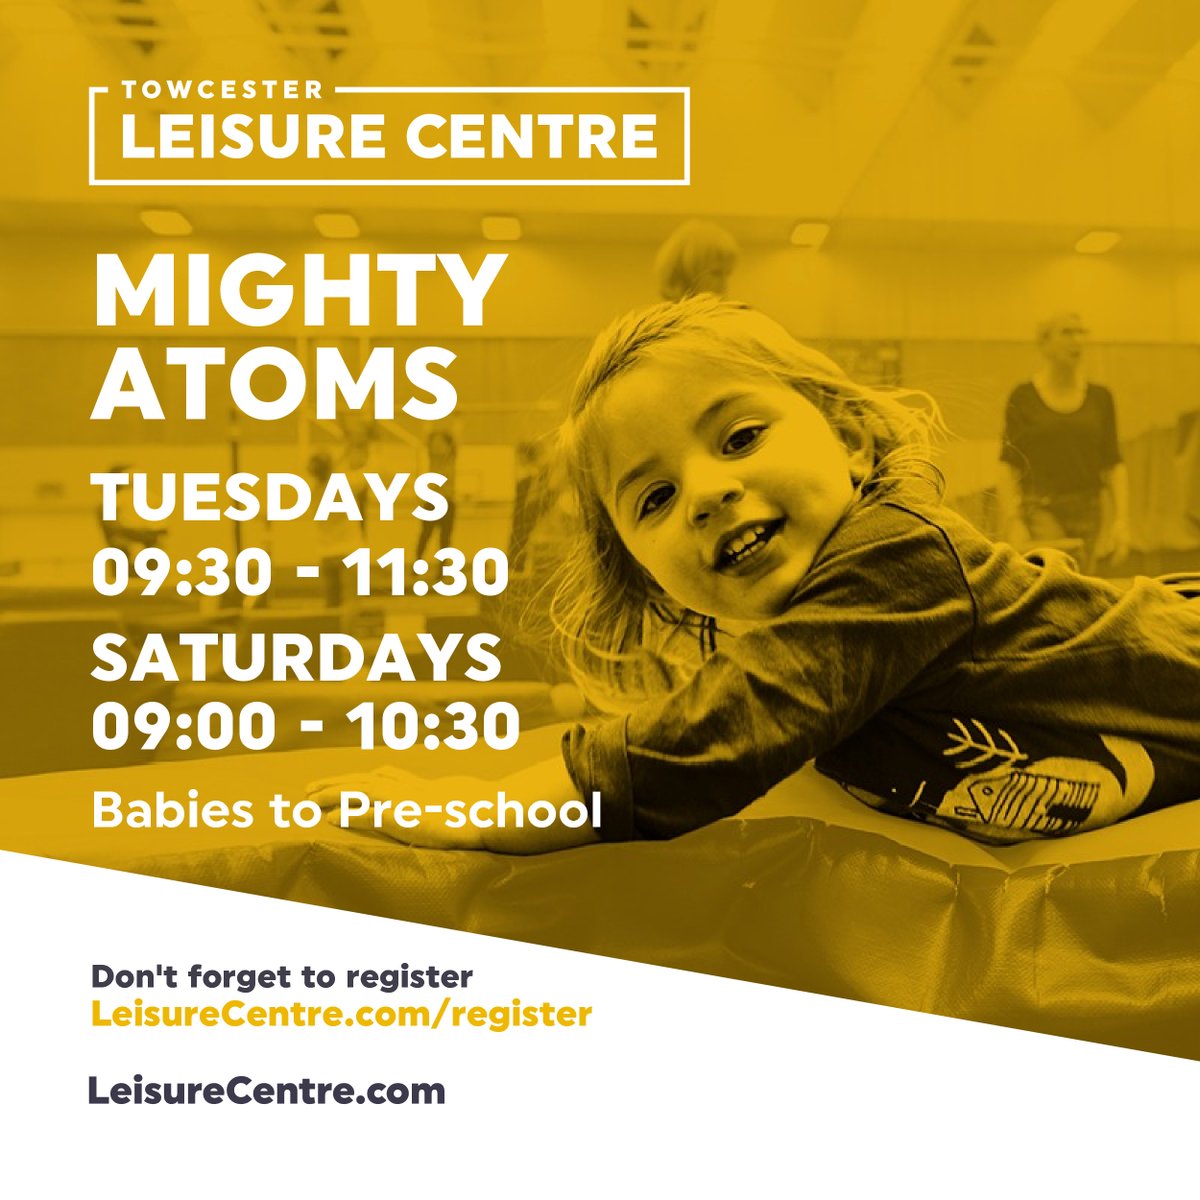 ***Mighty Atoms*** Soft play fun for babies - preschool! Bouncy castle, obstacle course, toys, games but most importantly FUN! #funandgames #childrensactivities #mylocal Please register at crowd.in/77T7nM before your visit to save time on arrival (term time only)